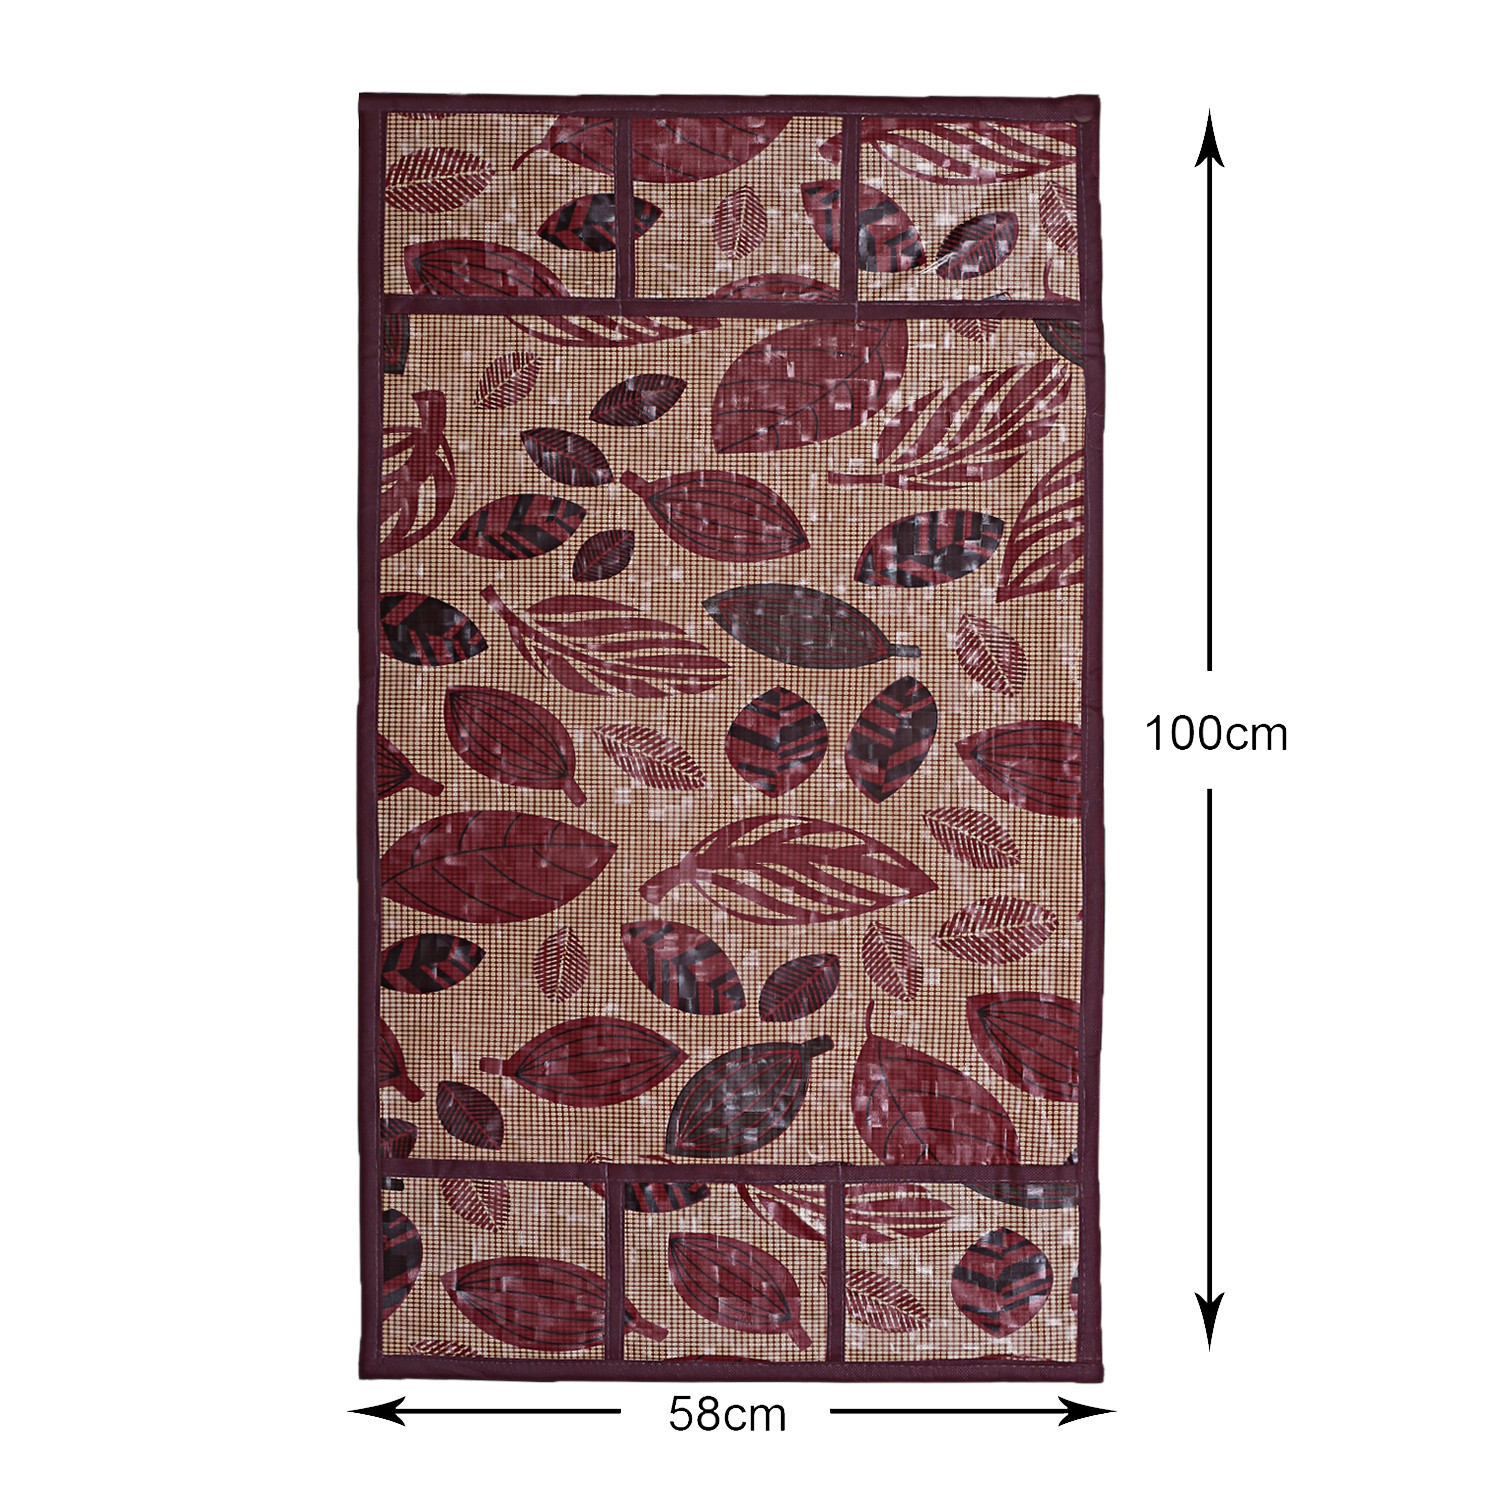 Kuber Industries Leaf Printed PVC Fridge Top Cover, Protect For Scratches, Wear & Tear And Dust With 6 Utility Side Pockets (Maroon)